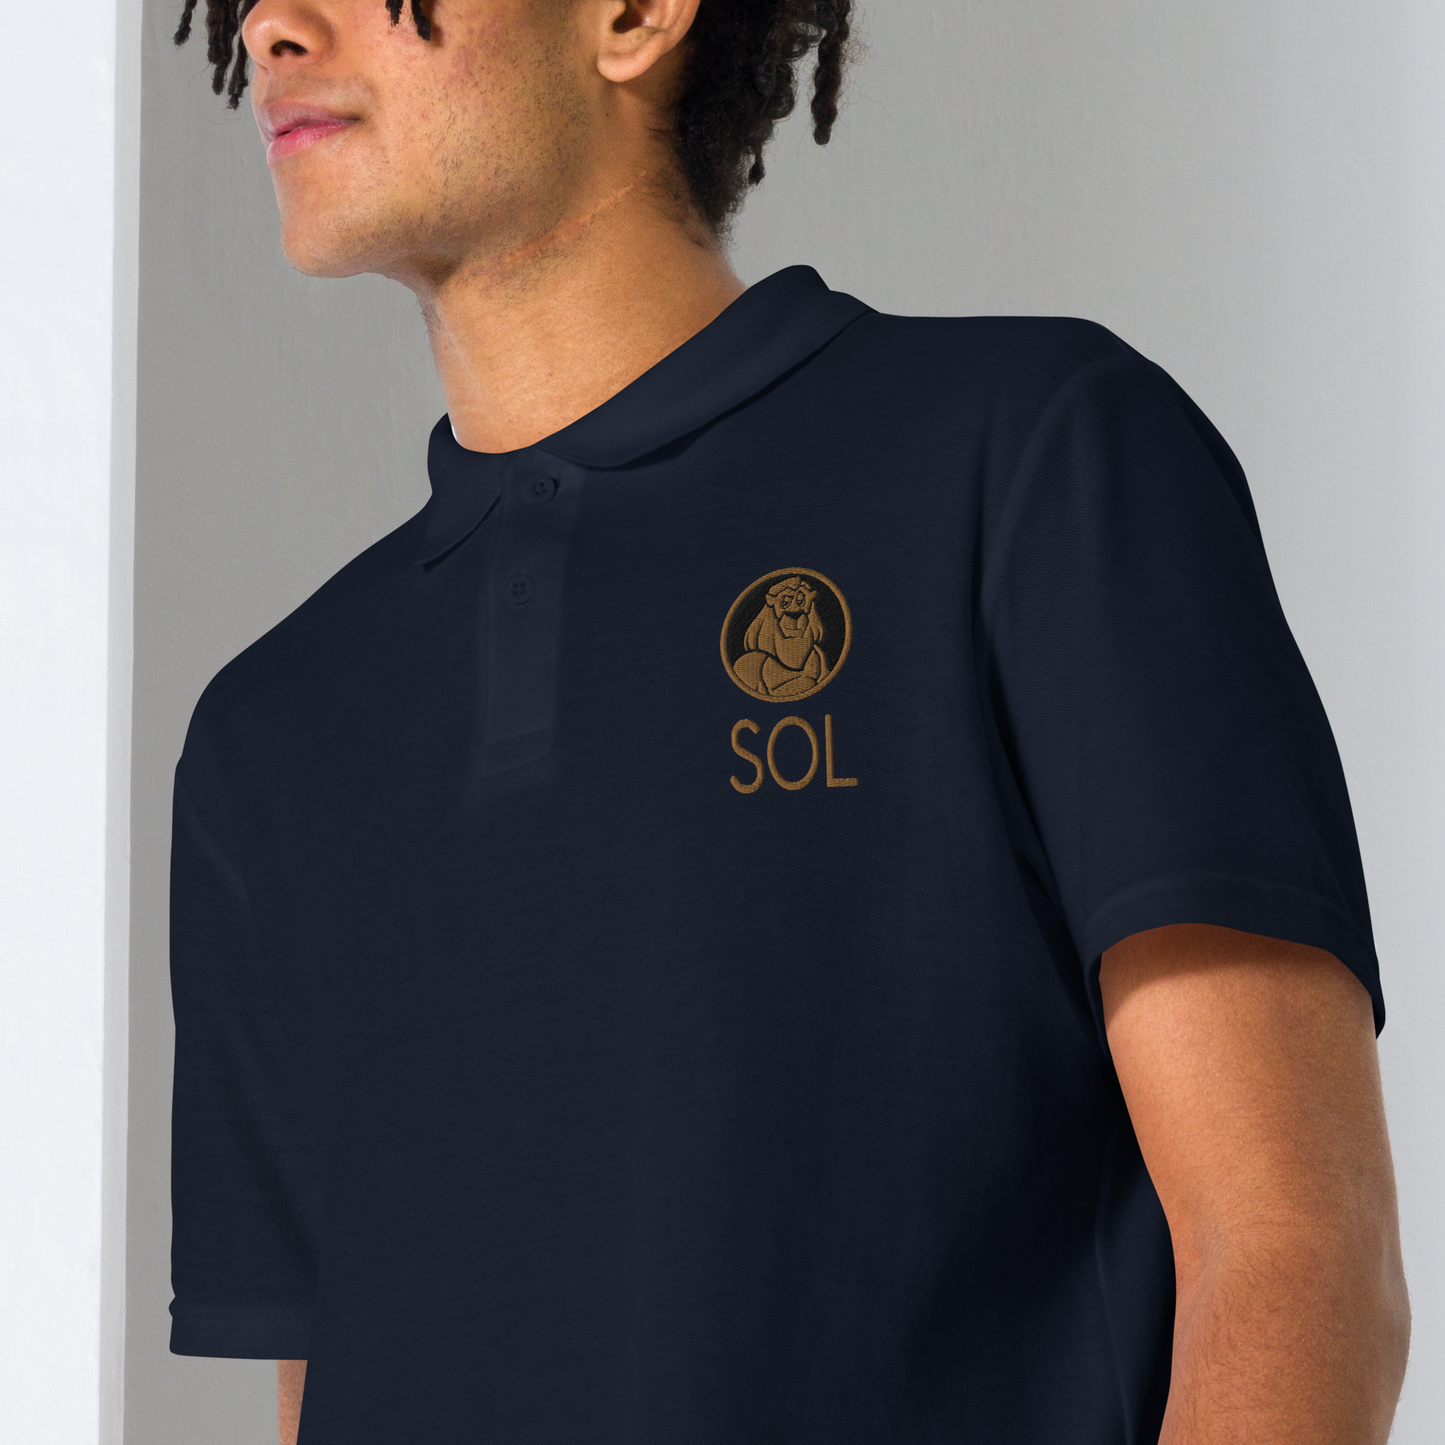 Unisex Adult SOL Polo